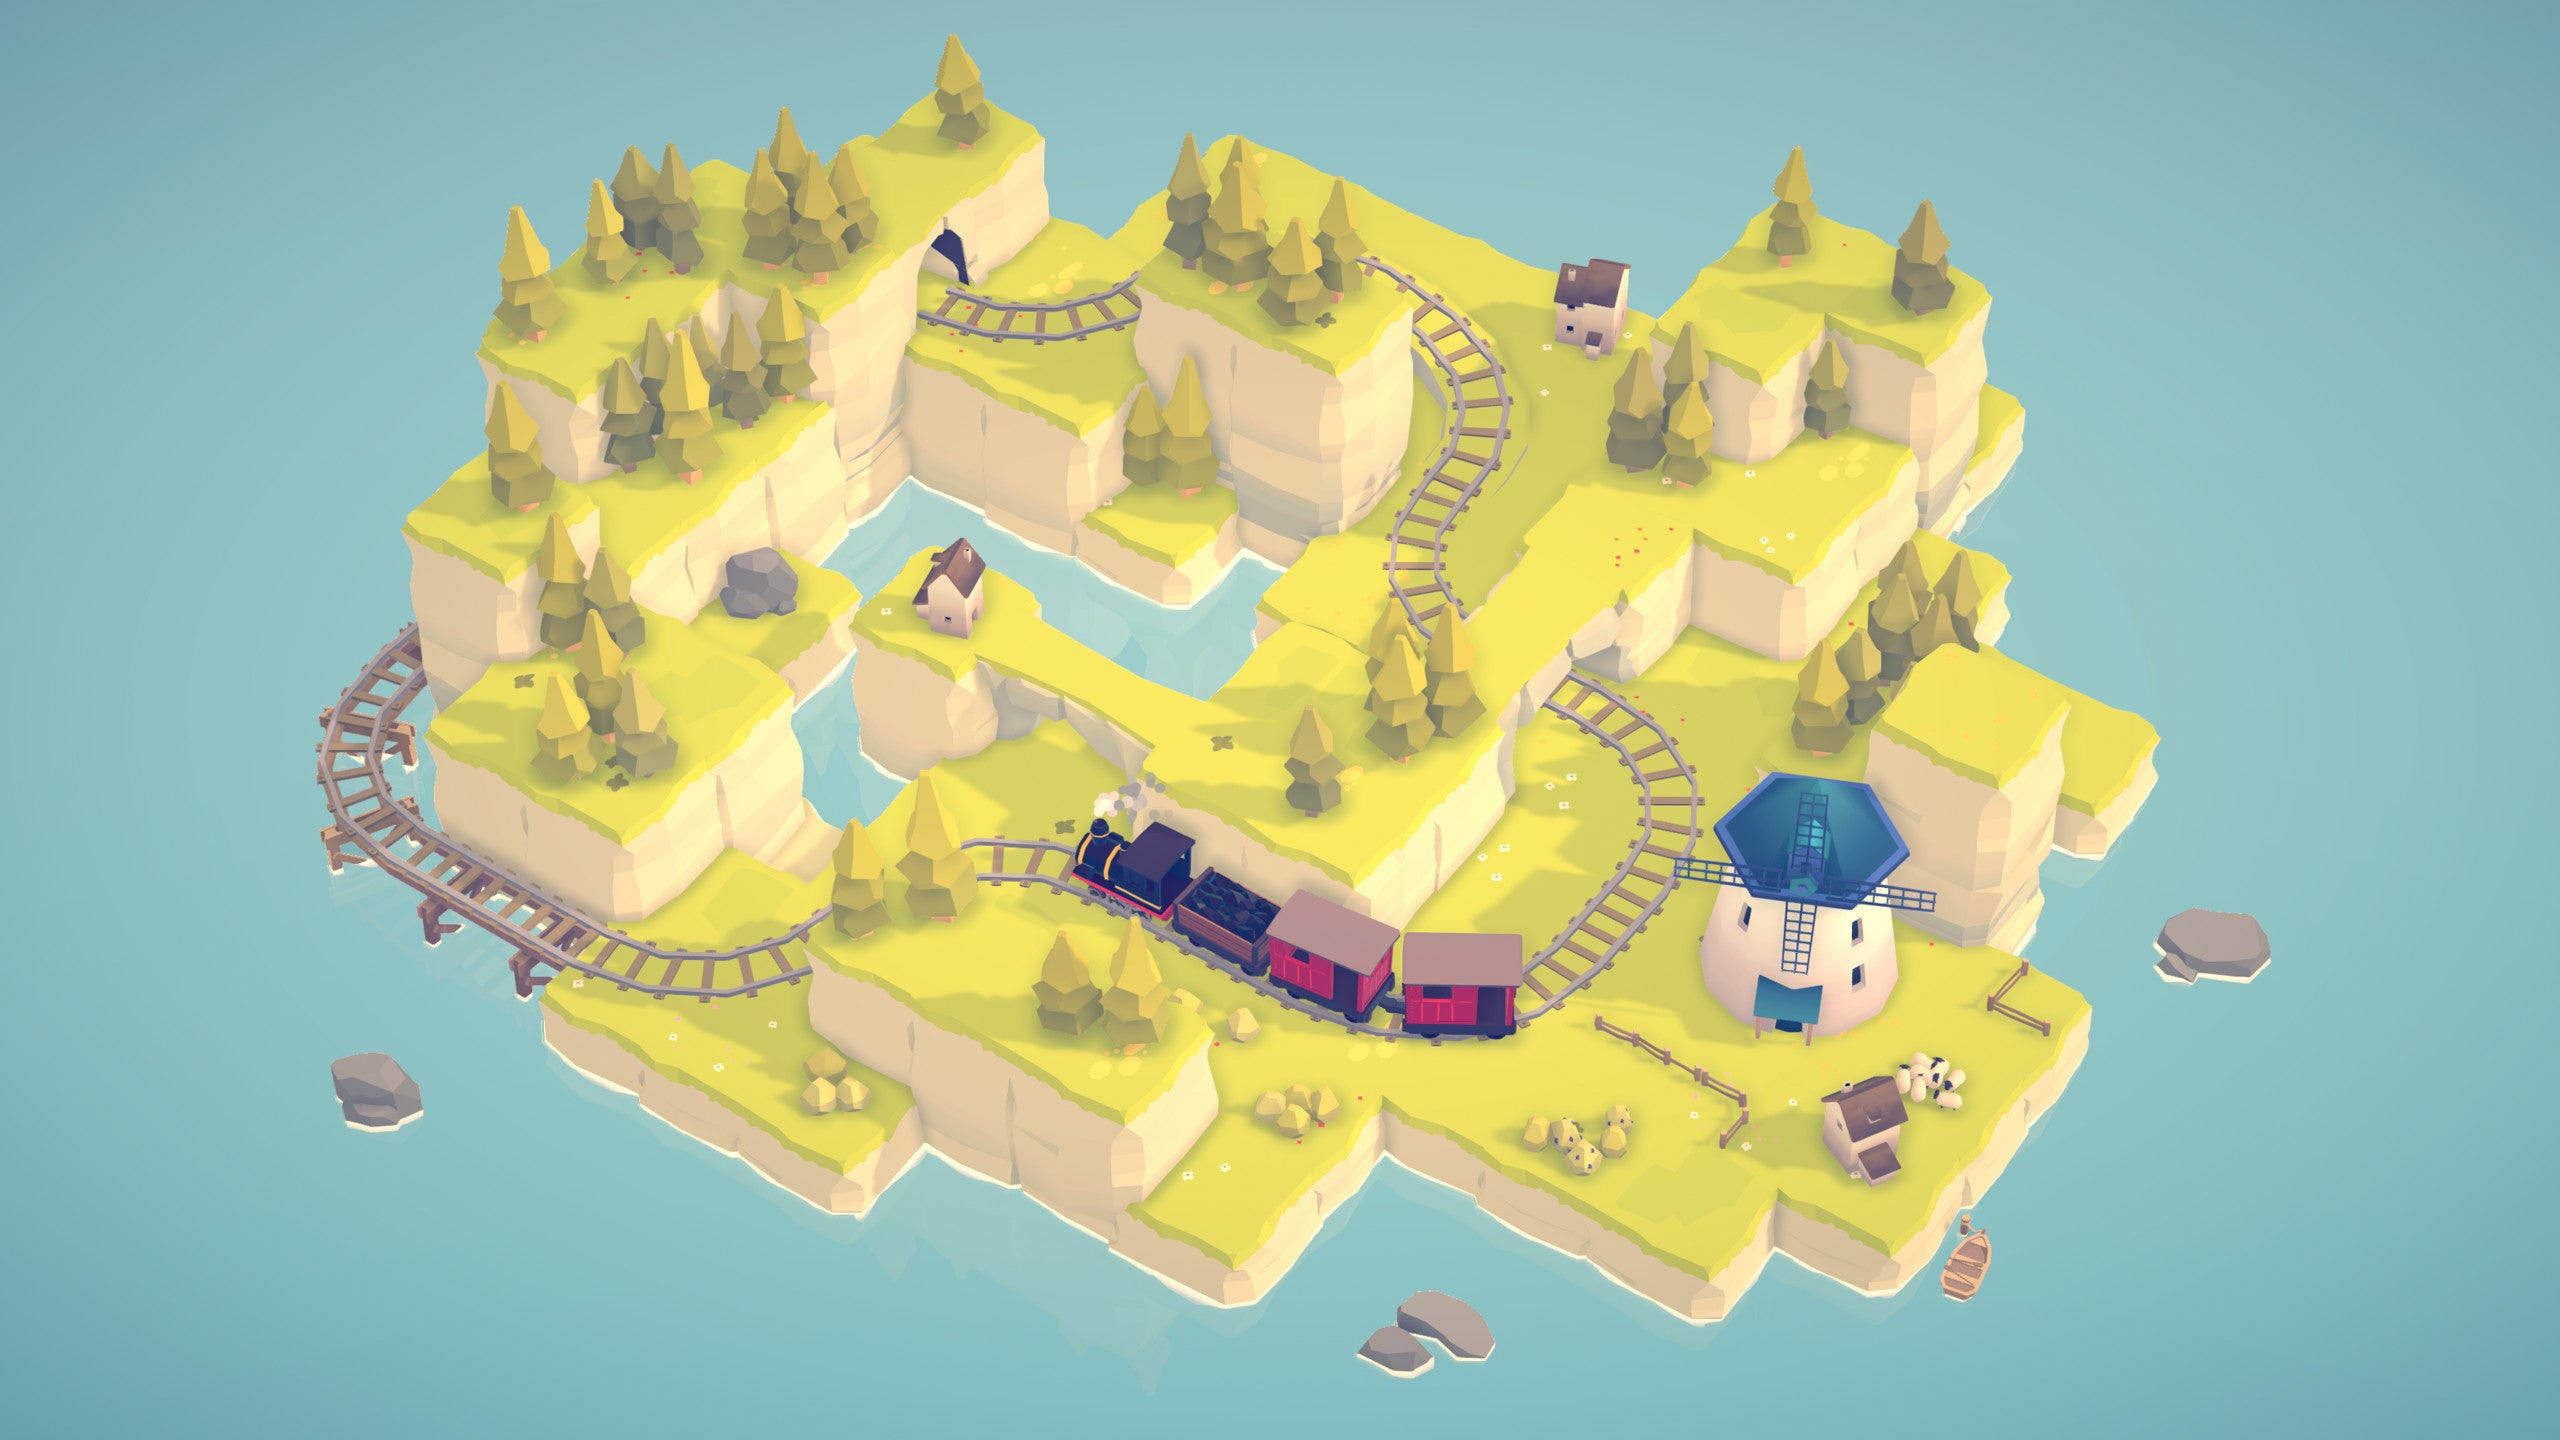 A cute island with green grass, blocky hills, trees, and a train trundling around it.